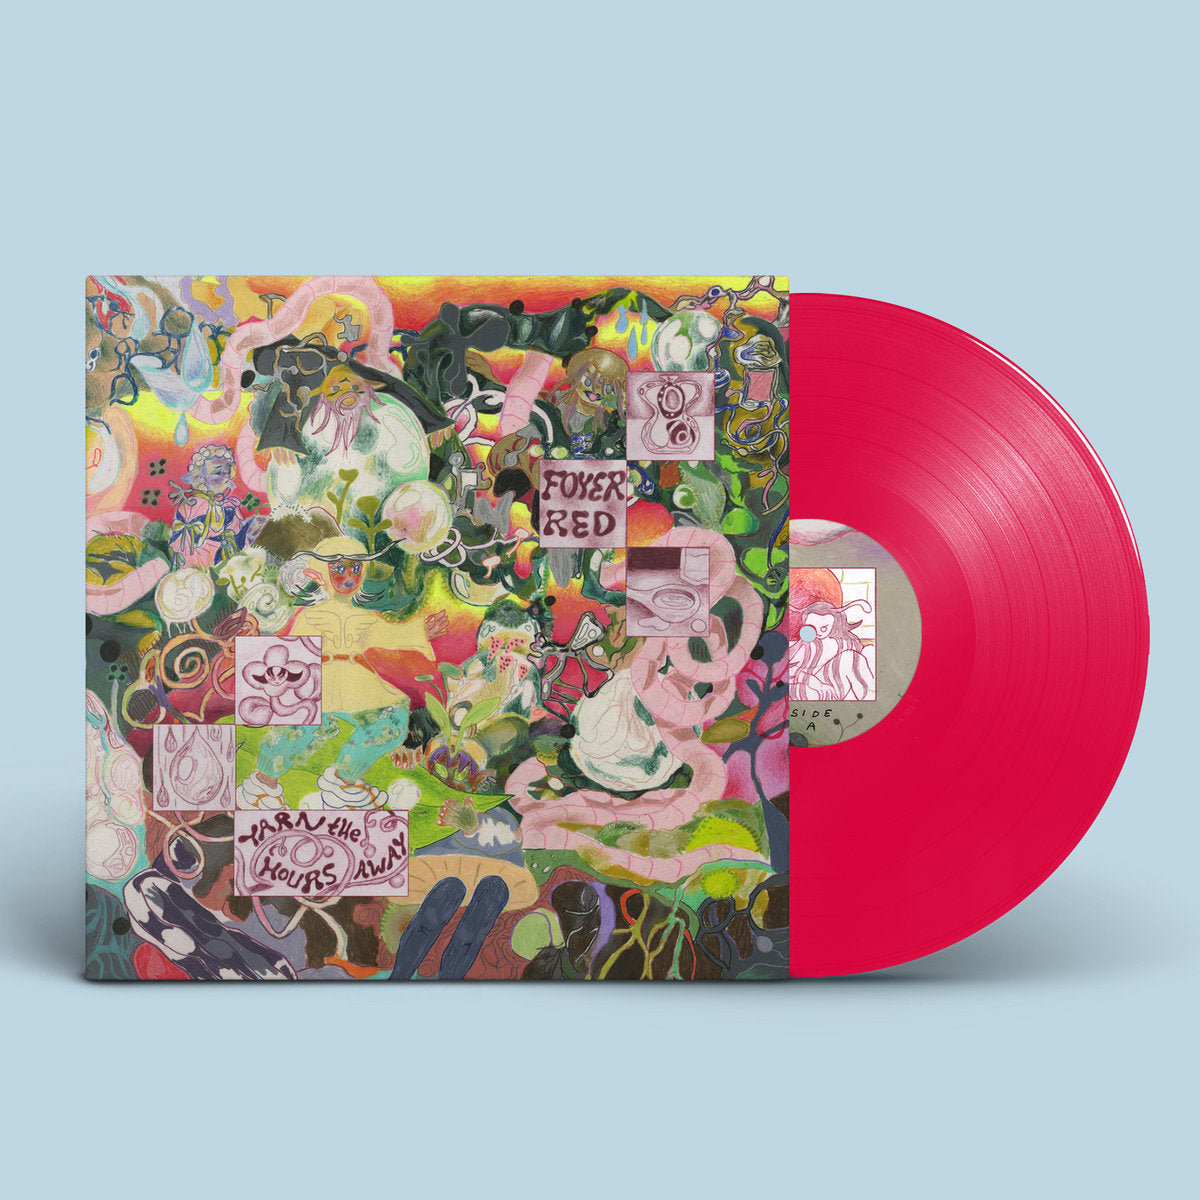 Foyer Red - Yarn the Hours Away: Limited Edition Foyer Red Vinyl LP